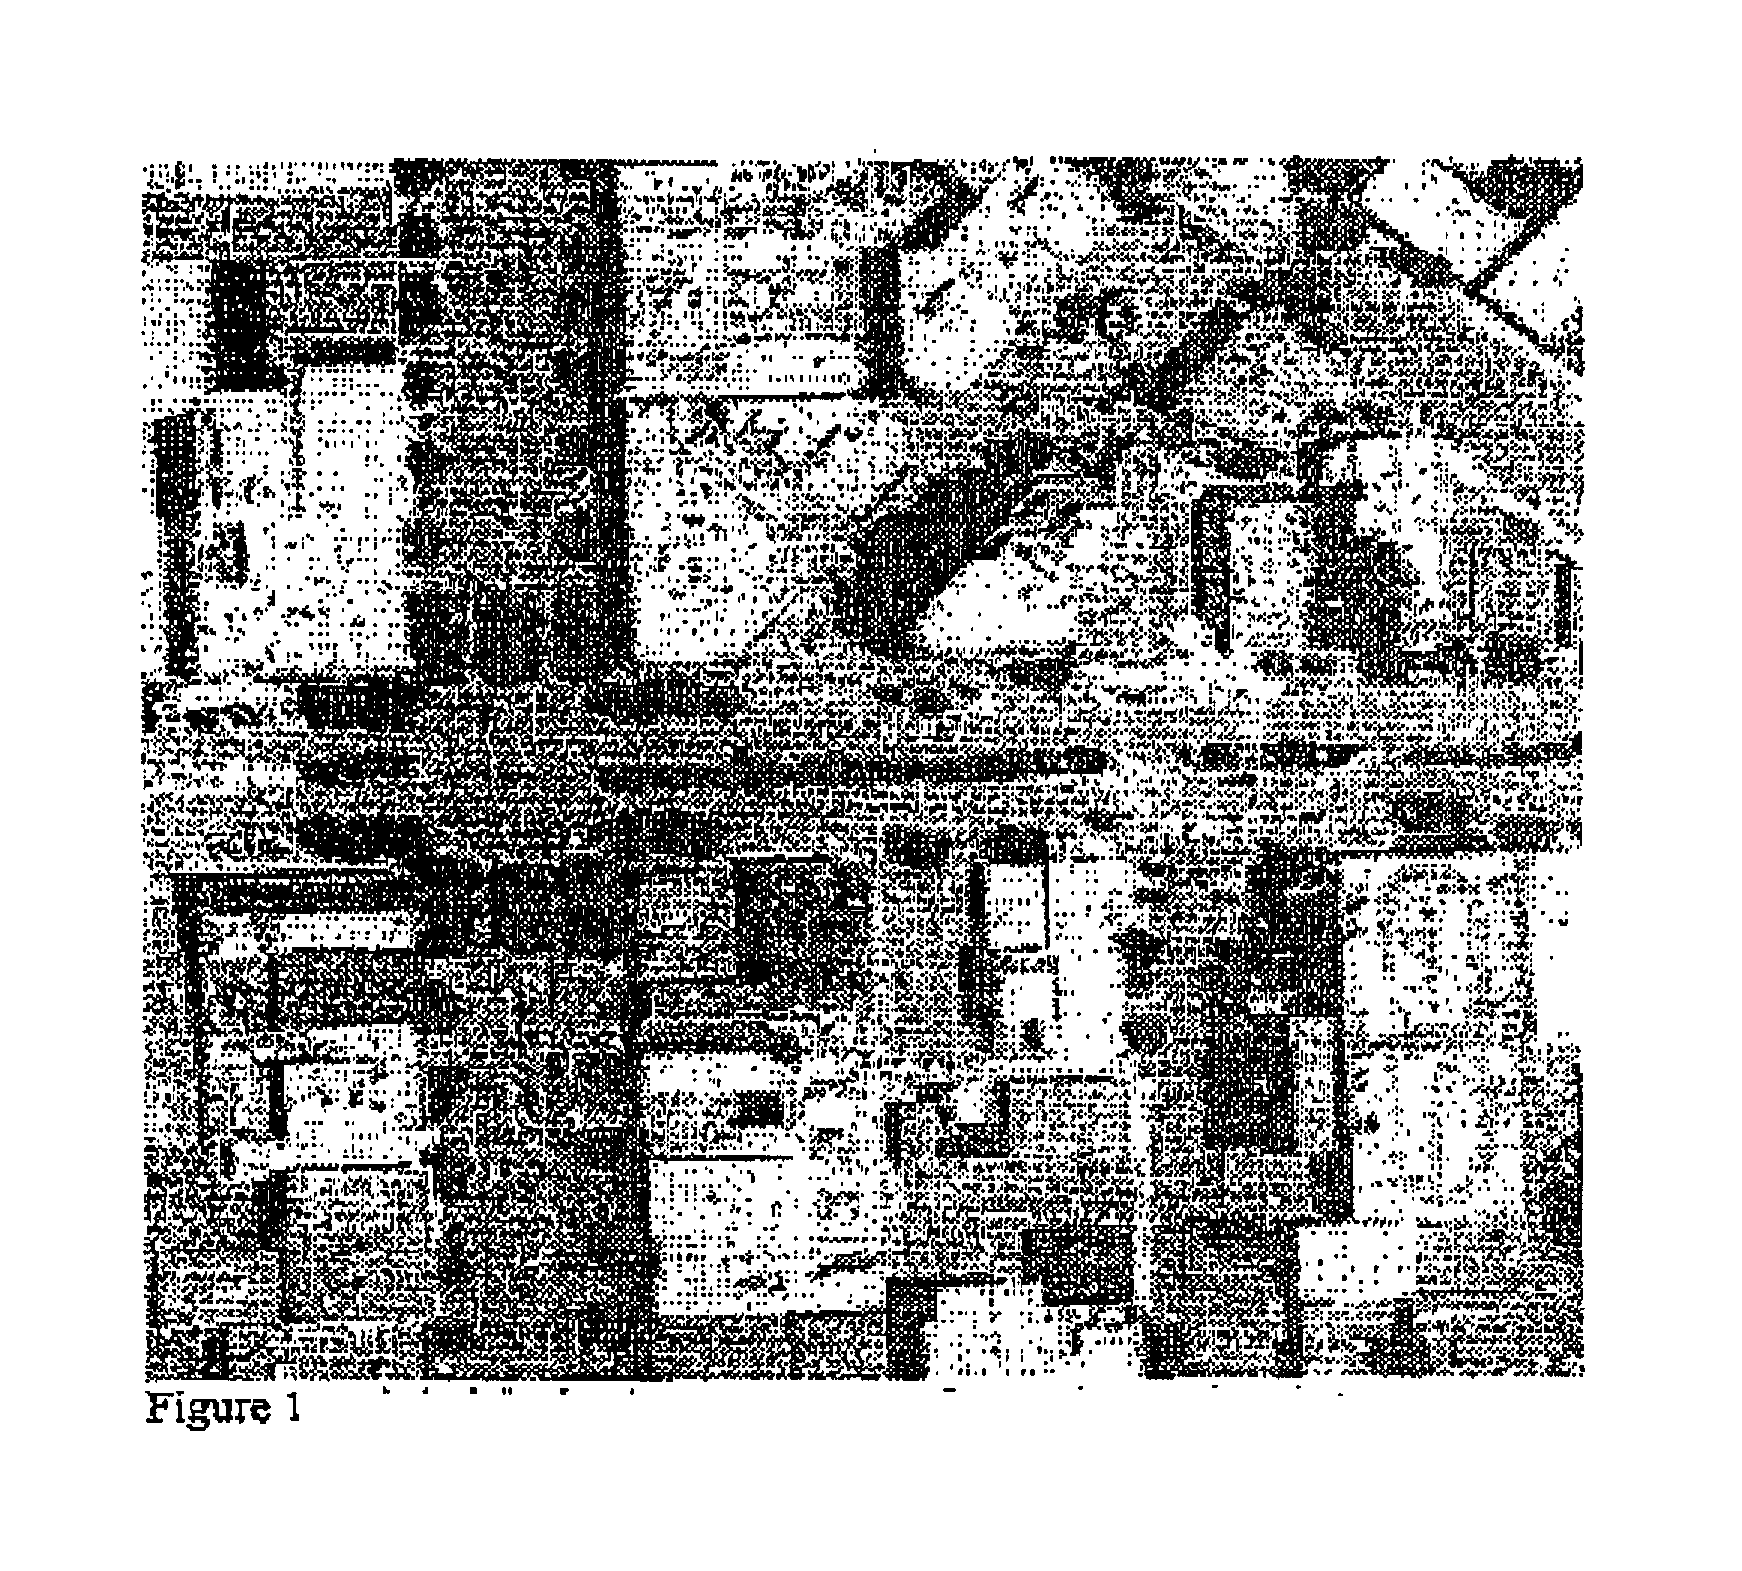 Method and system for modeling and managing terrain, buildings, and infrastructure